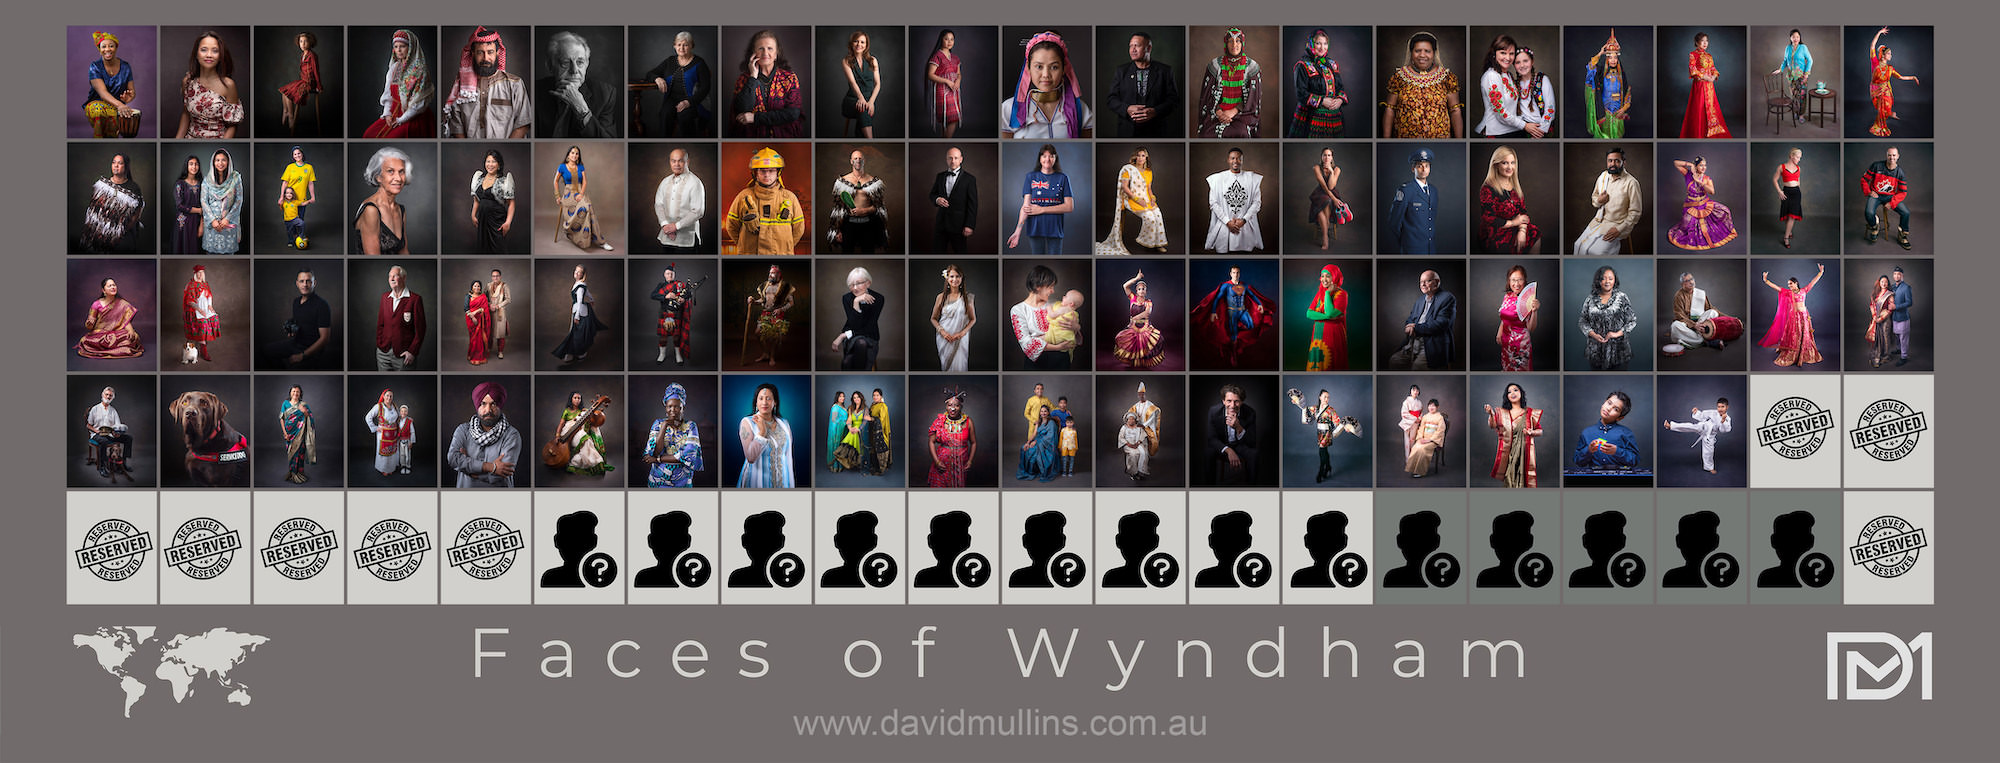 Faces of Wyndham